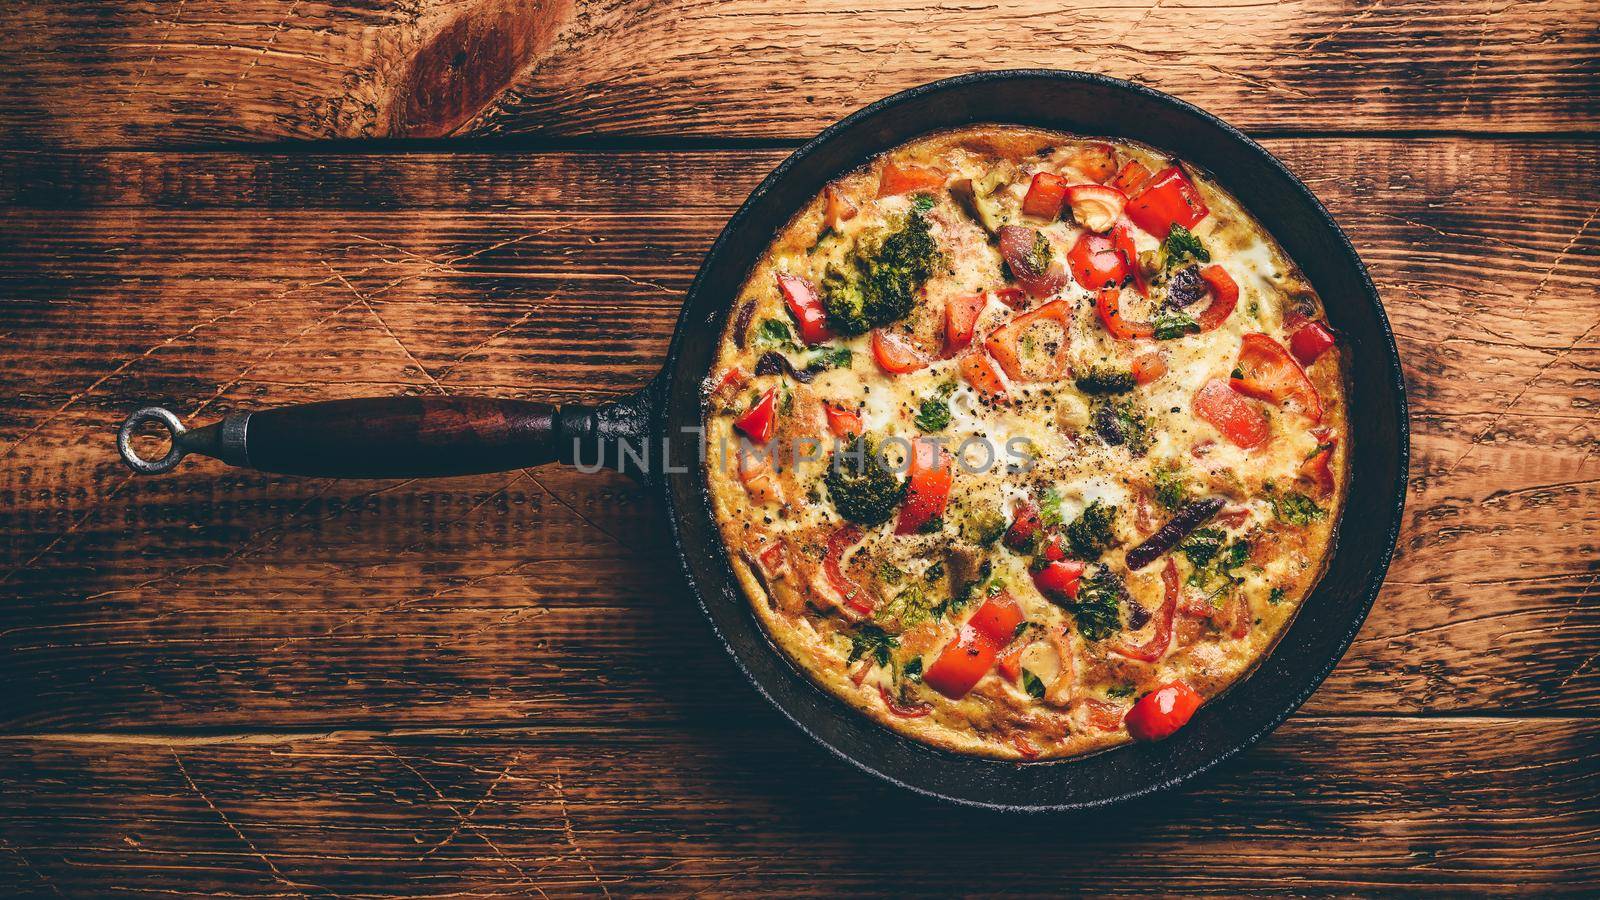 Frittata with broccoli and red pepper in cast iron skillet by Seva_blsv